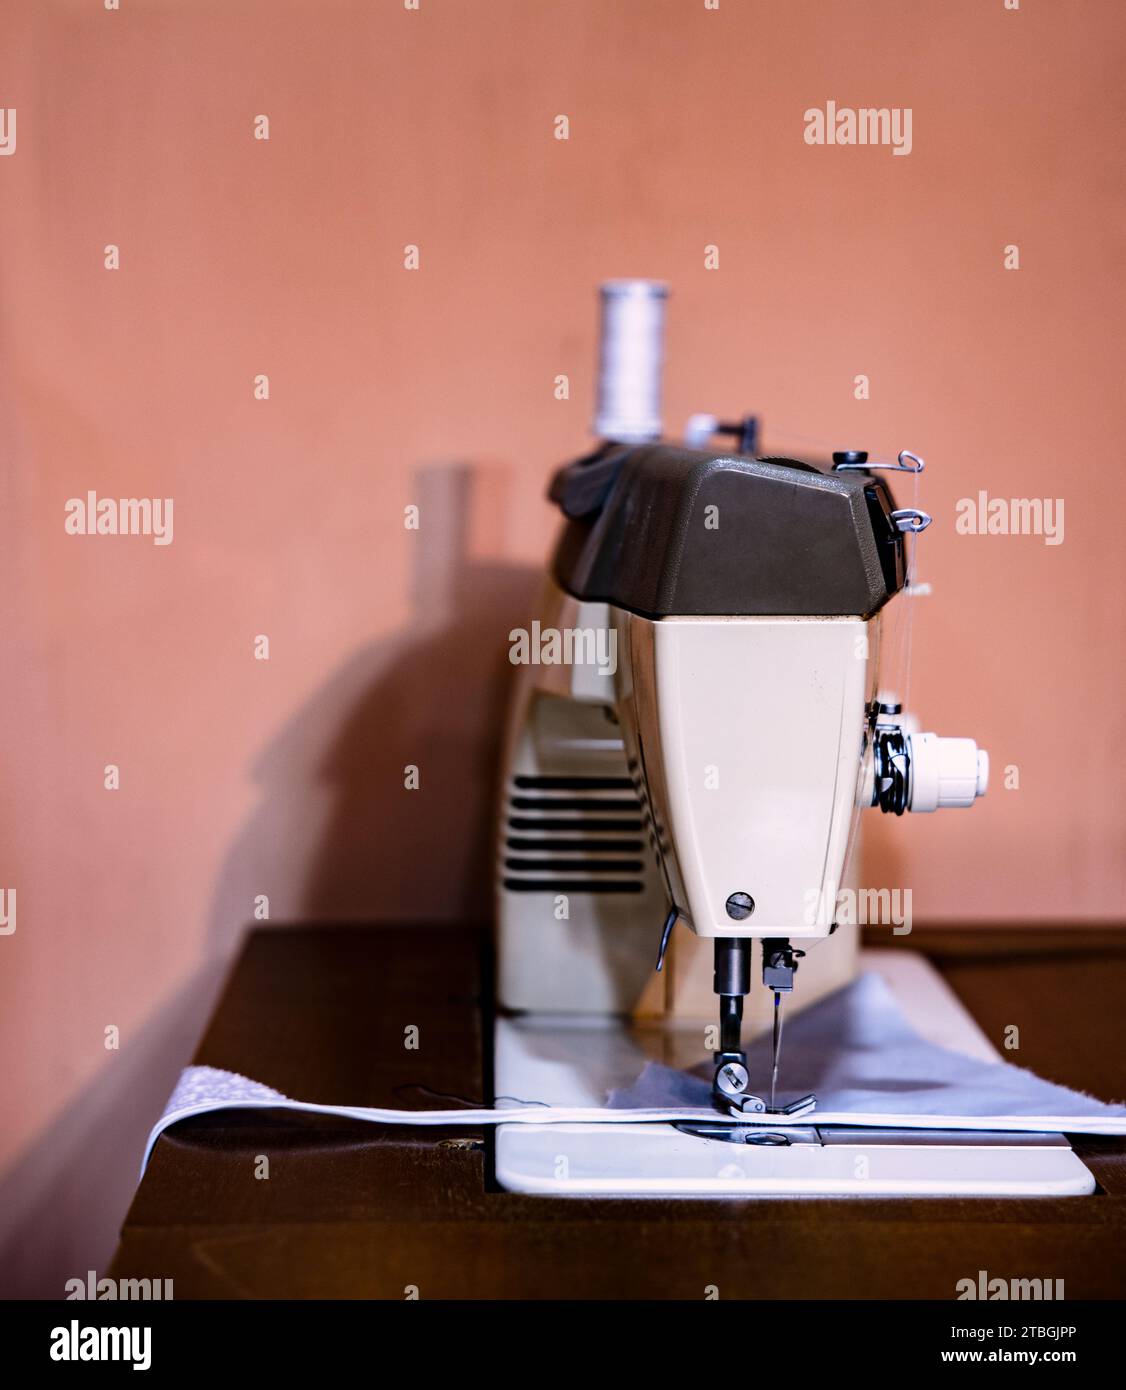 An old sewing machine situated on a wooden table in a home interior Stock Photo